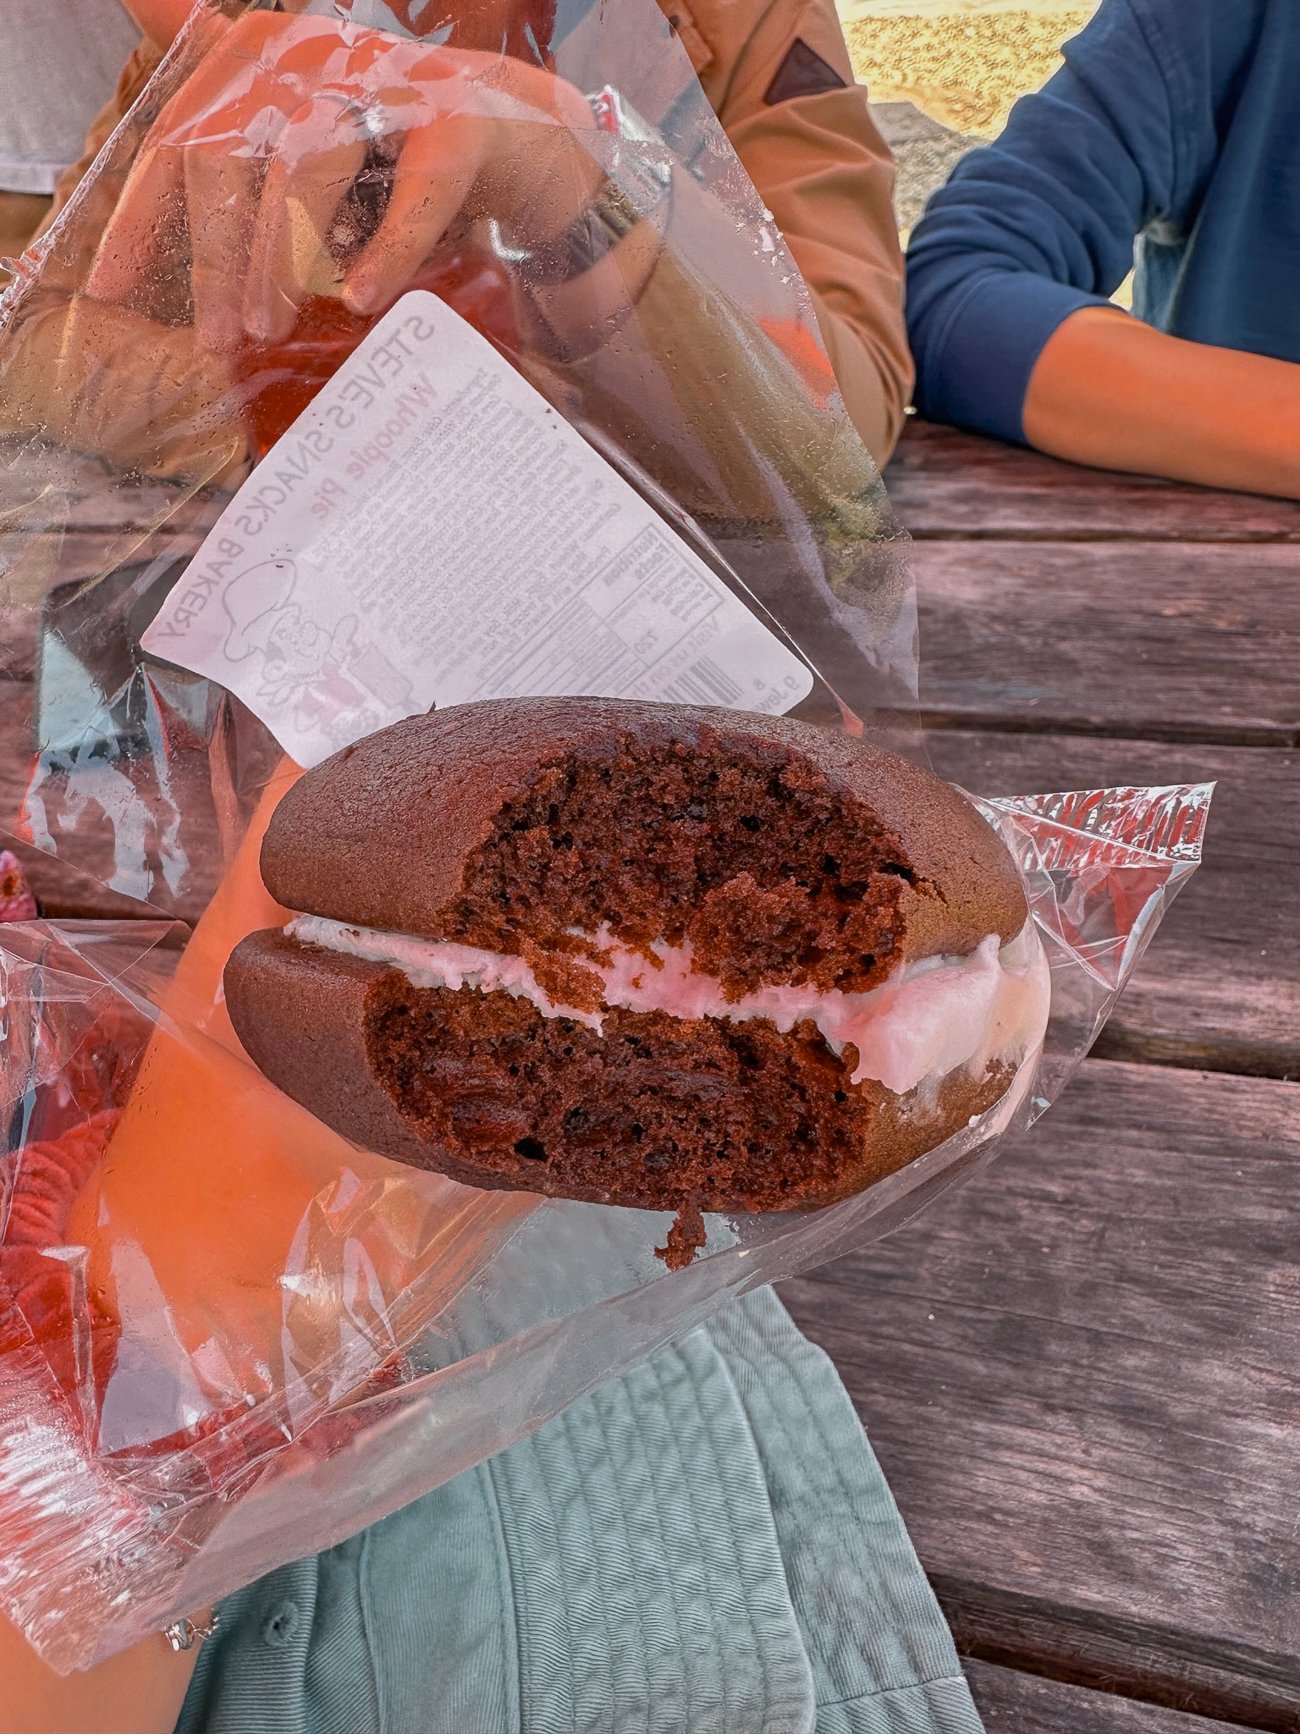 A chocolate whoopie pie with a bite taken out